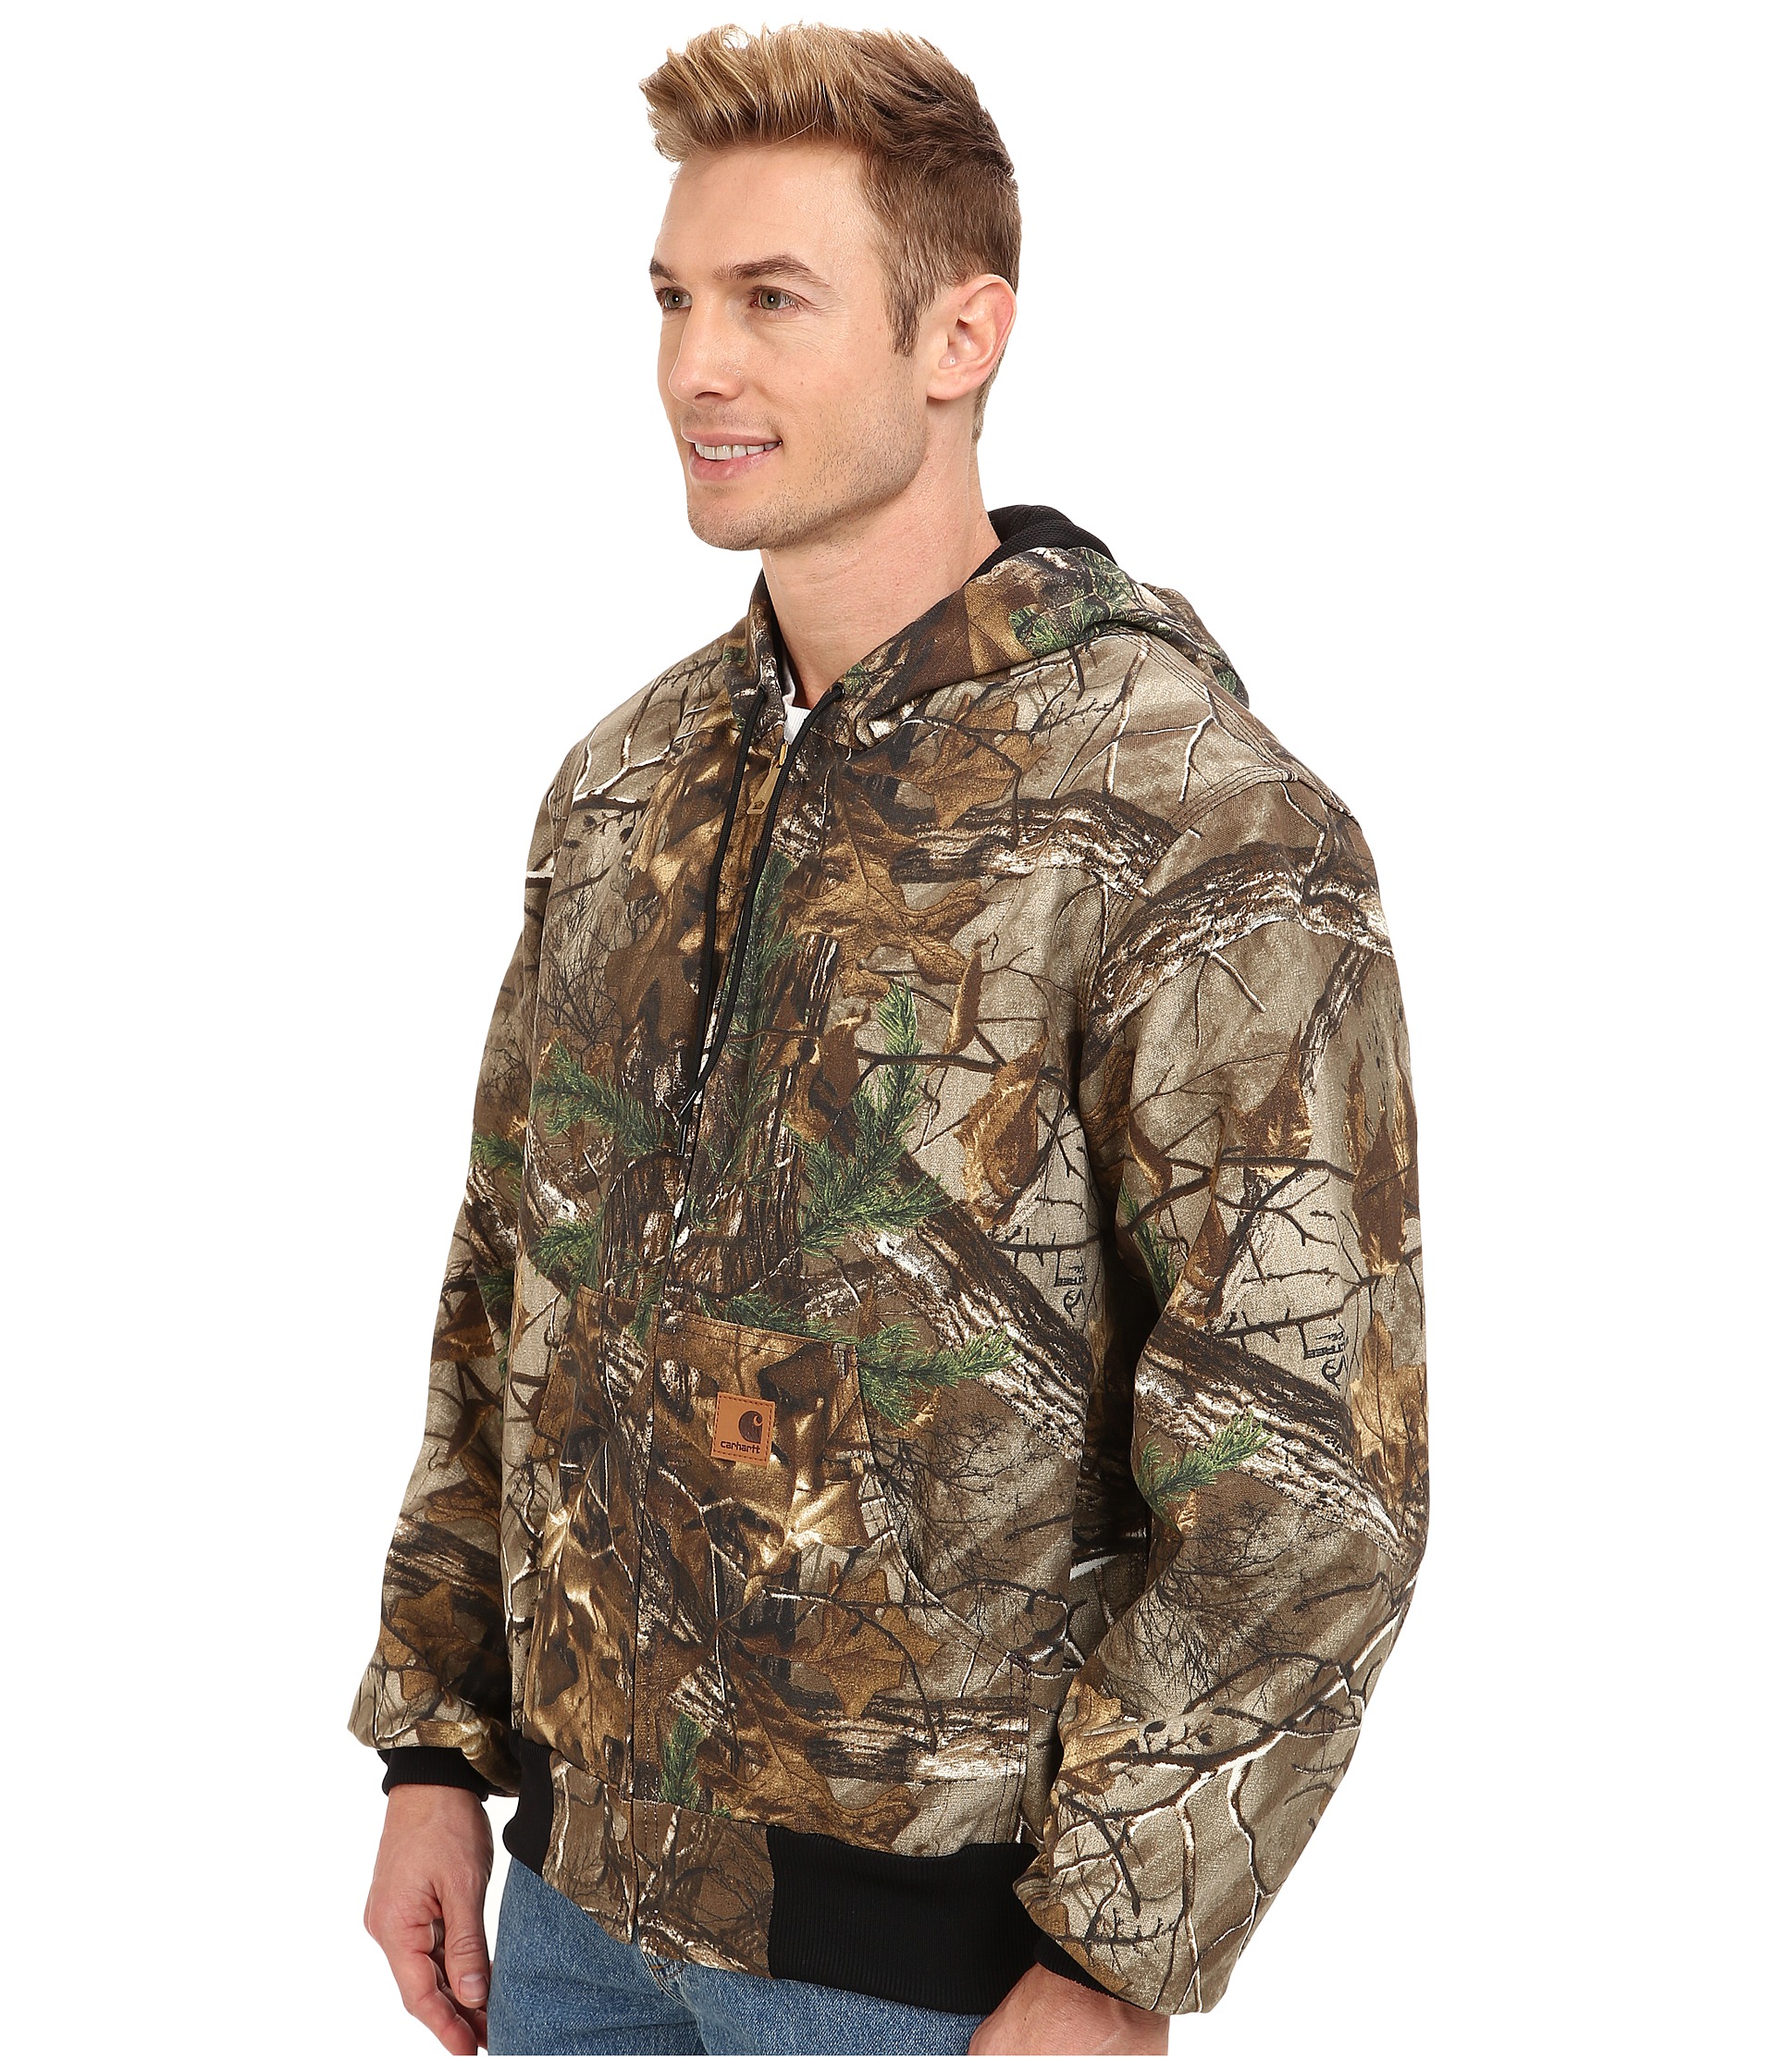 Carhartt Active Jacket Thermal Lined - spicyloading